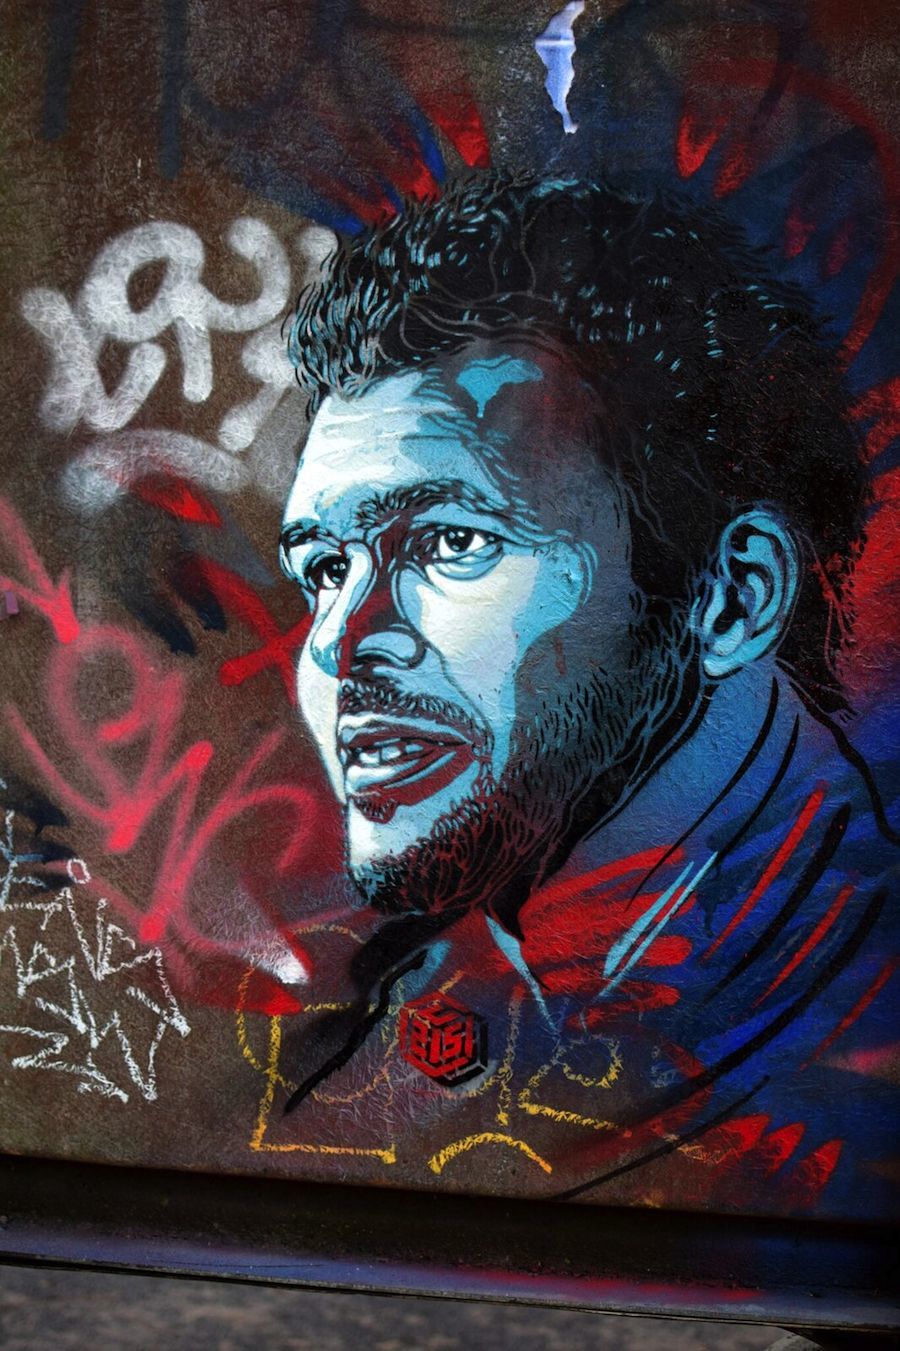 New C215 Exhibition About Athletes in Nice, France-13